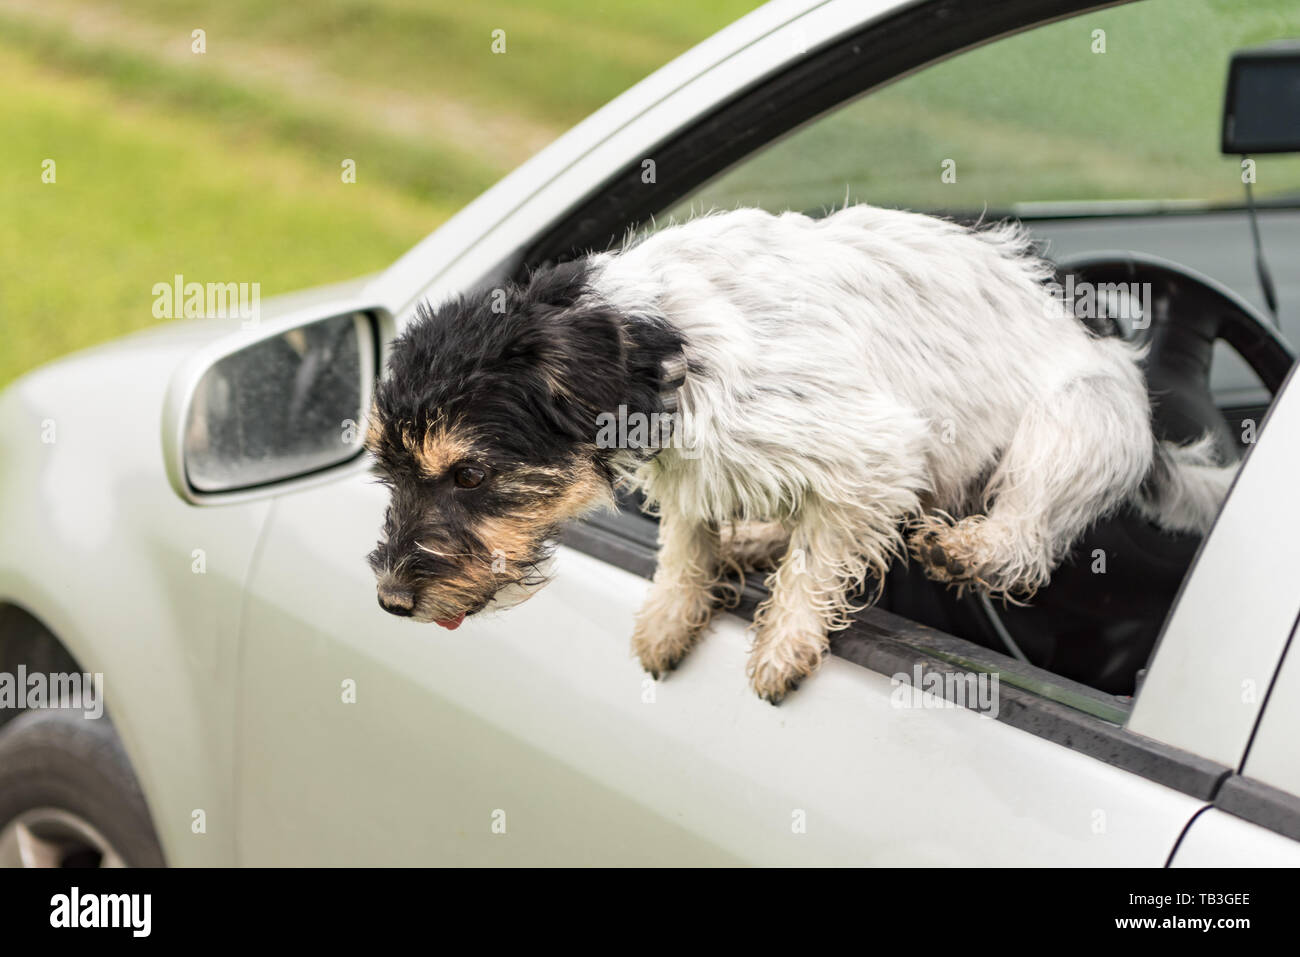 small dog is sitting in a car and looking out of the car window jack russell terrier 2 years old TB3GEE